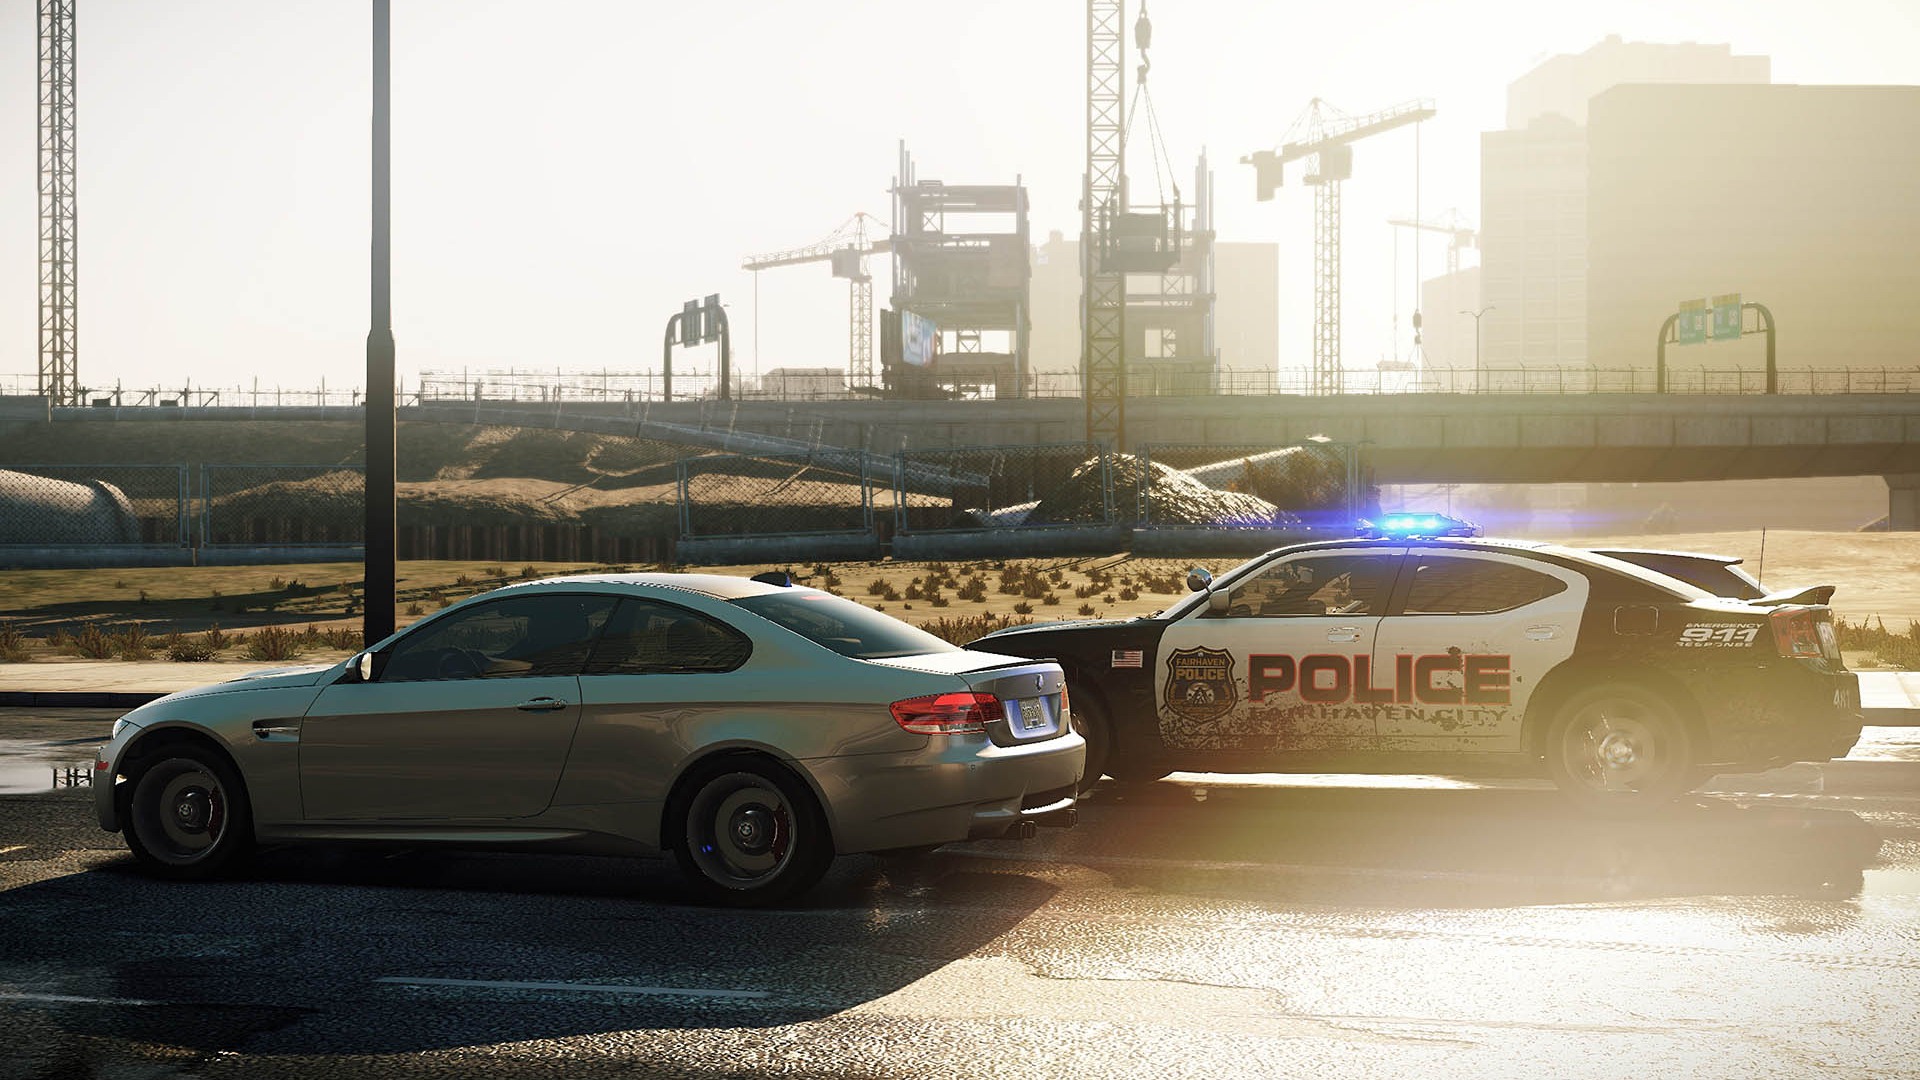 Need for Speed: Most Wanted 极品飞车17：最高通缉 高清壁纸8 - 1920x1080